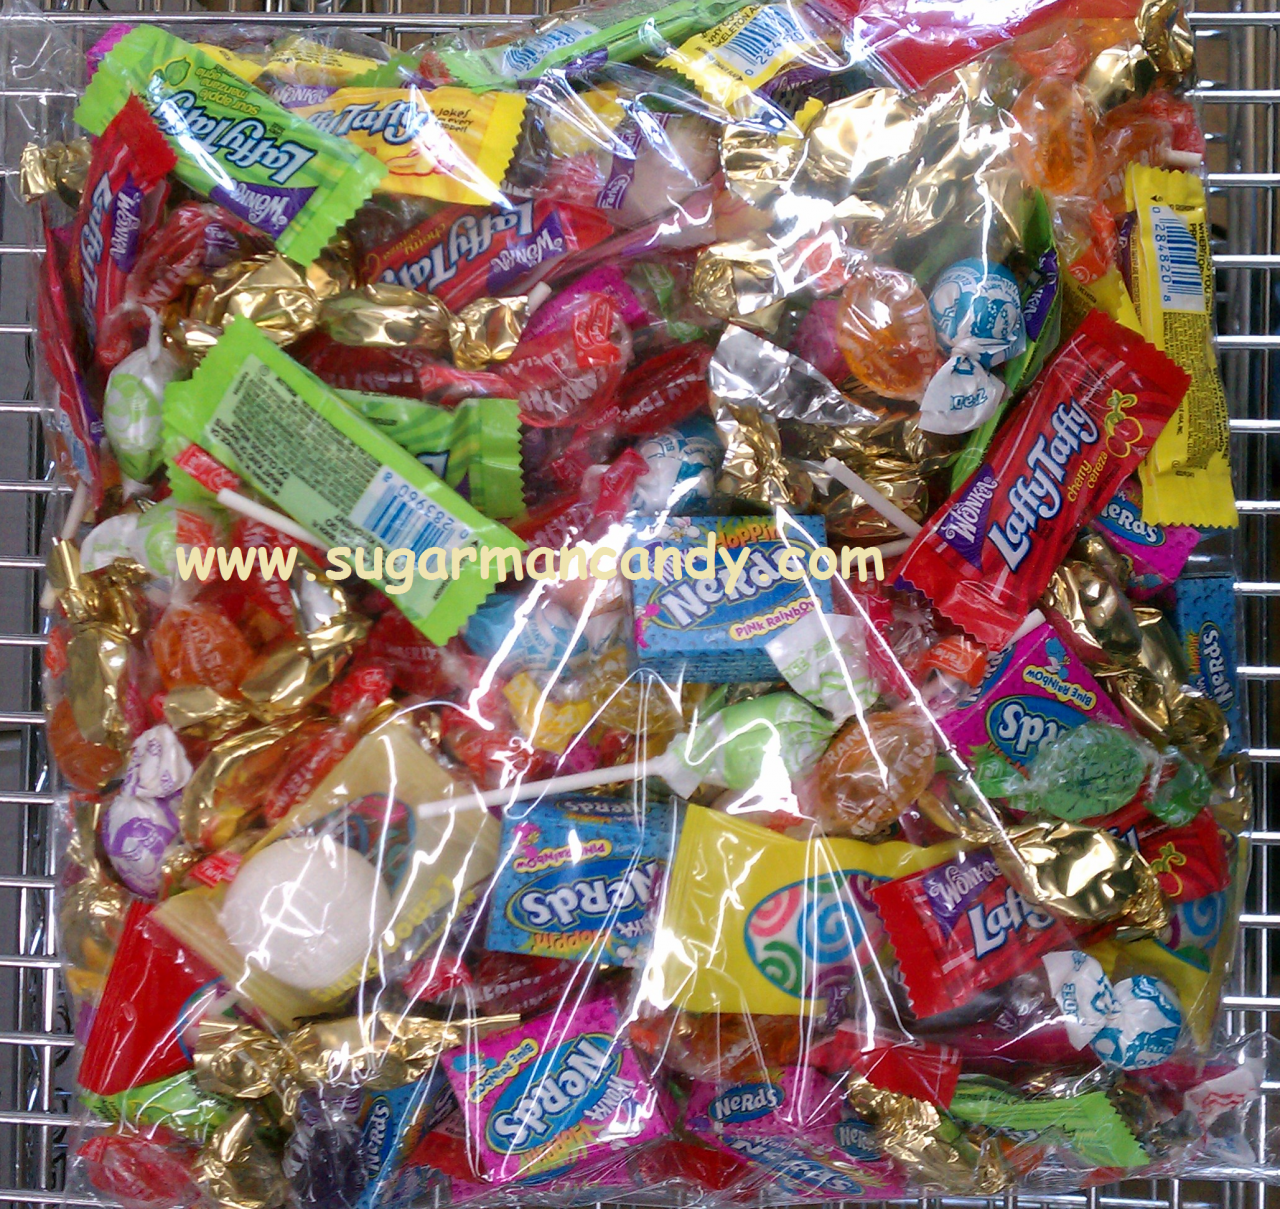 Buy Chocolate Candy Mix - 4 LB Bulk Assortment - Fun Size Chocolate Candy  Bars - Indivudally Wrapped for Pinata, Parade, Goody Bags and More